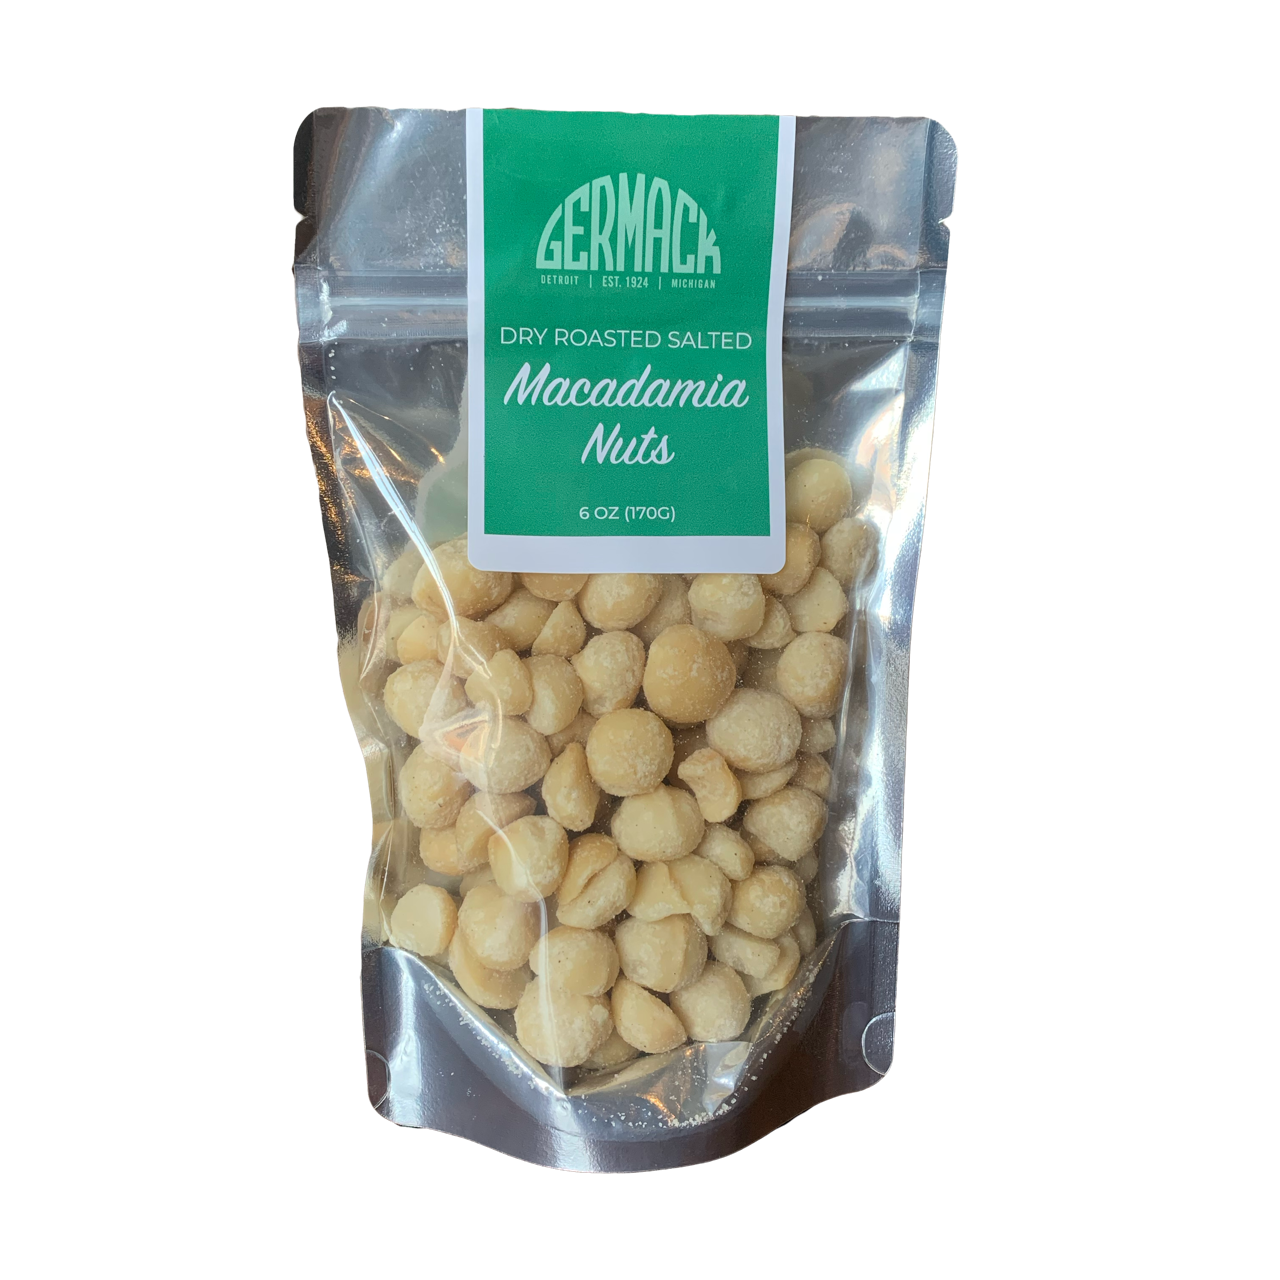 Picture Dry Roasted Salted Macadamia Nuts